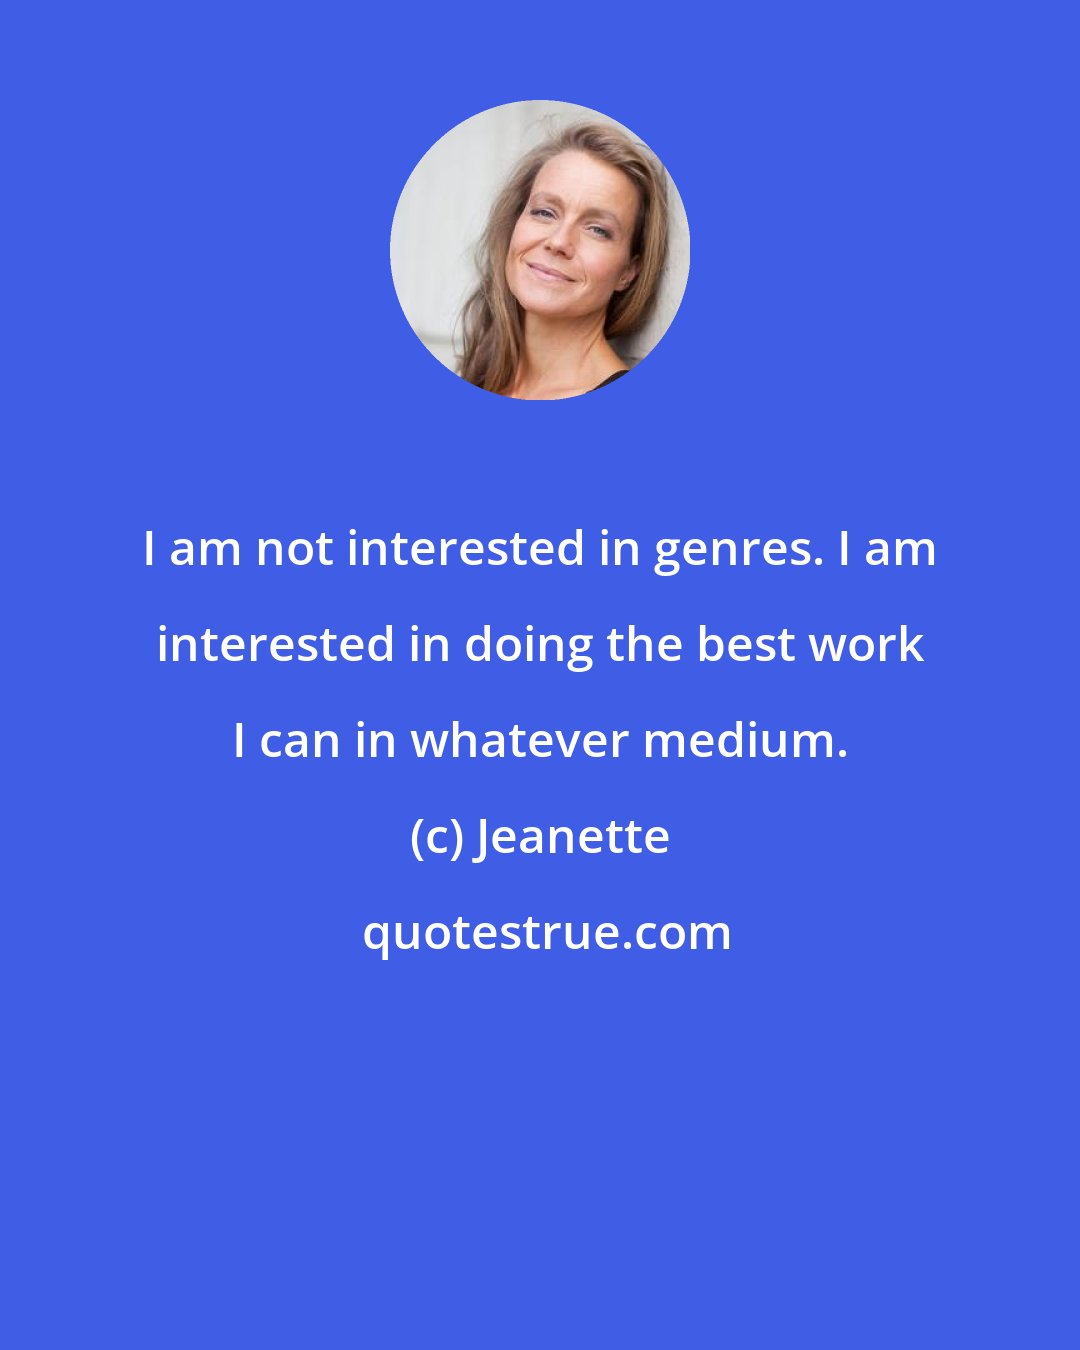 Jeanette: I am not interested in genres. I am interested in doing the best work I can in whatever medium.